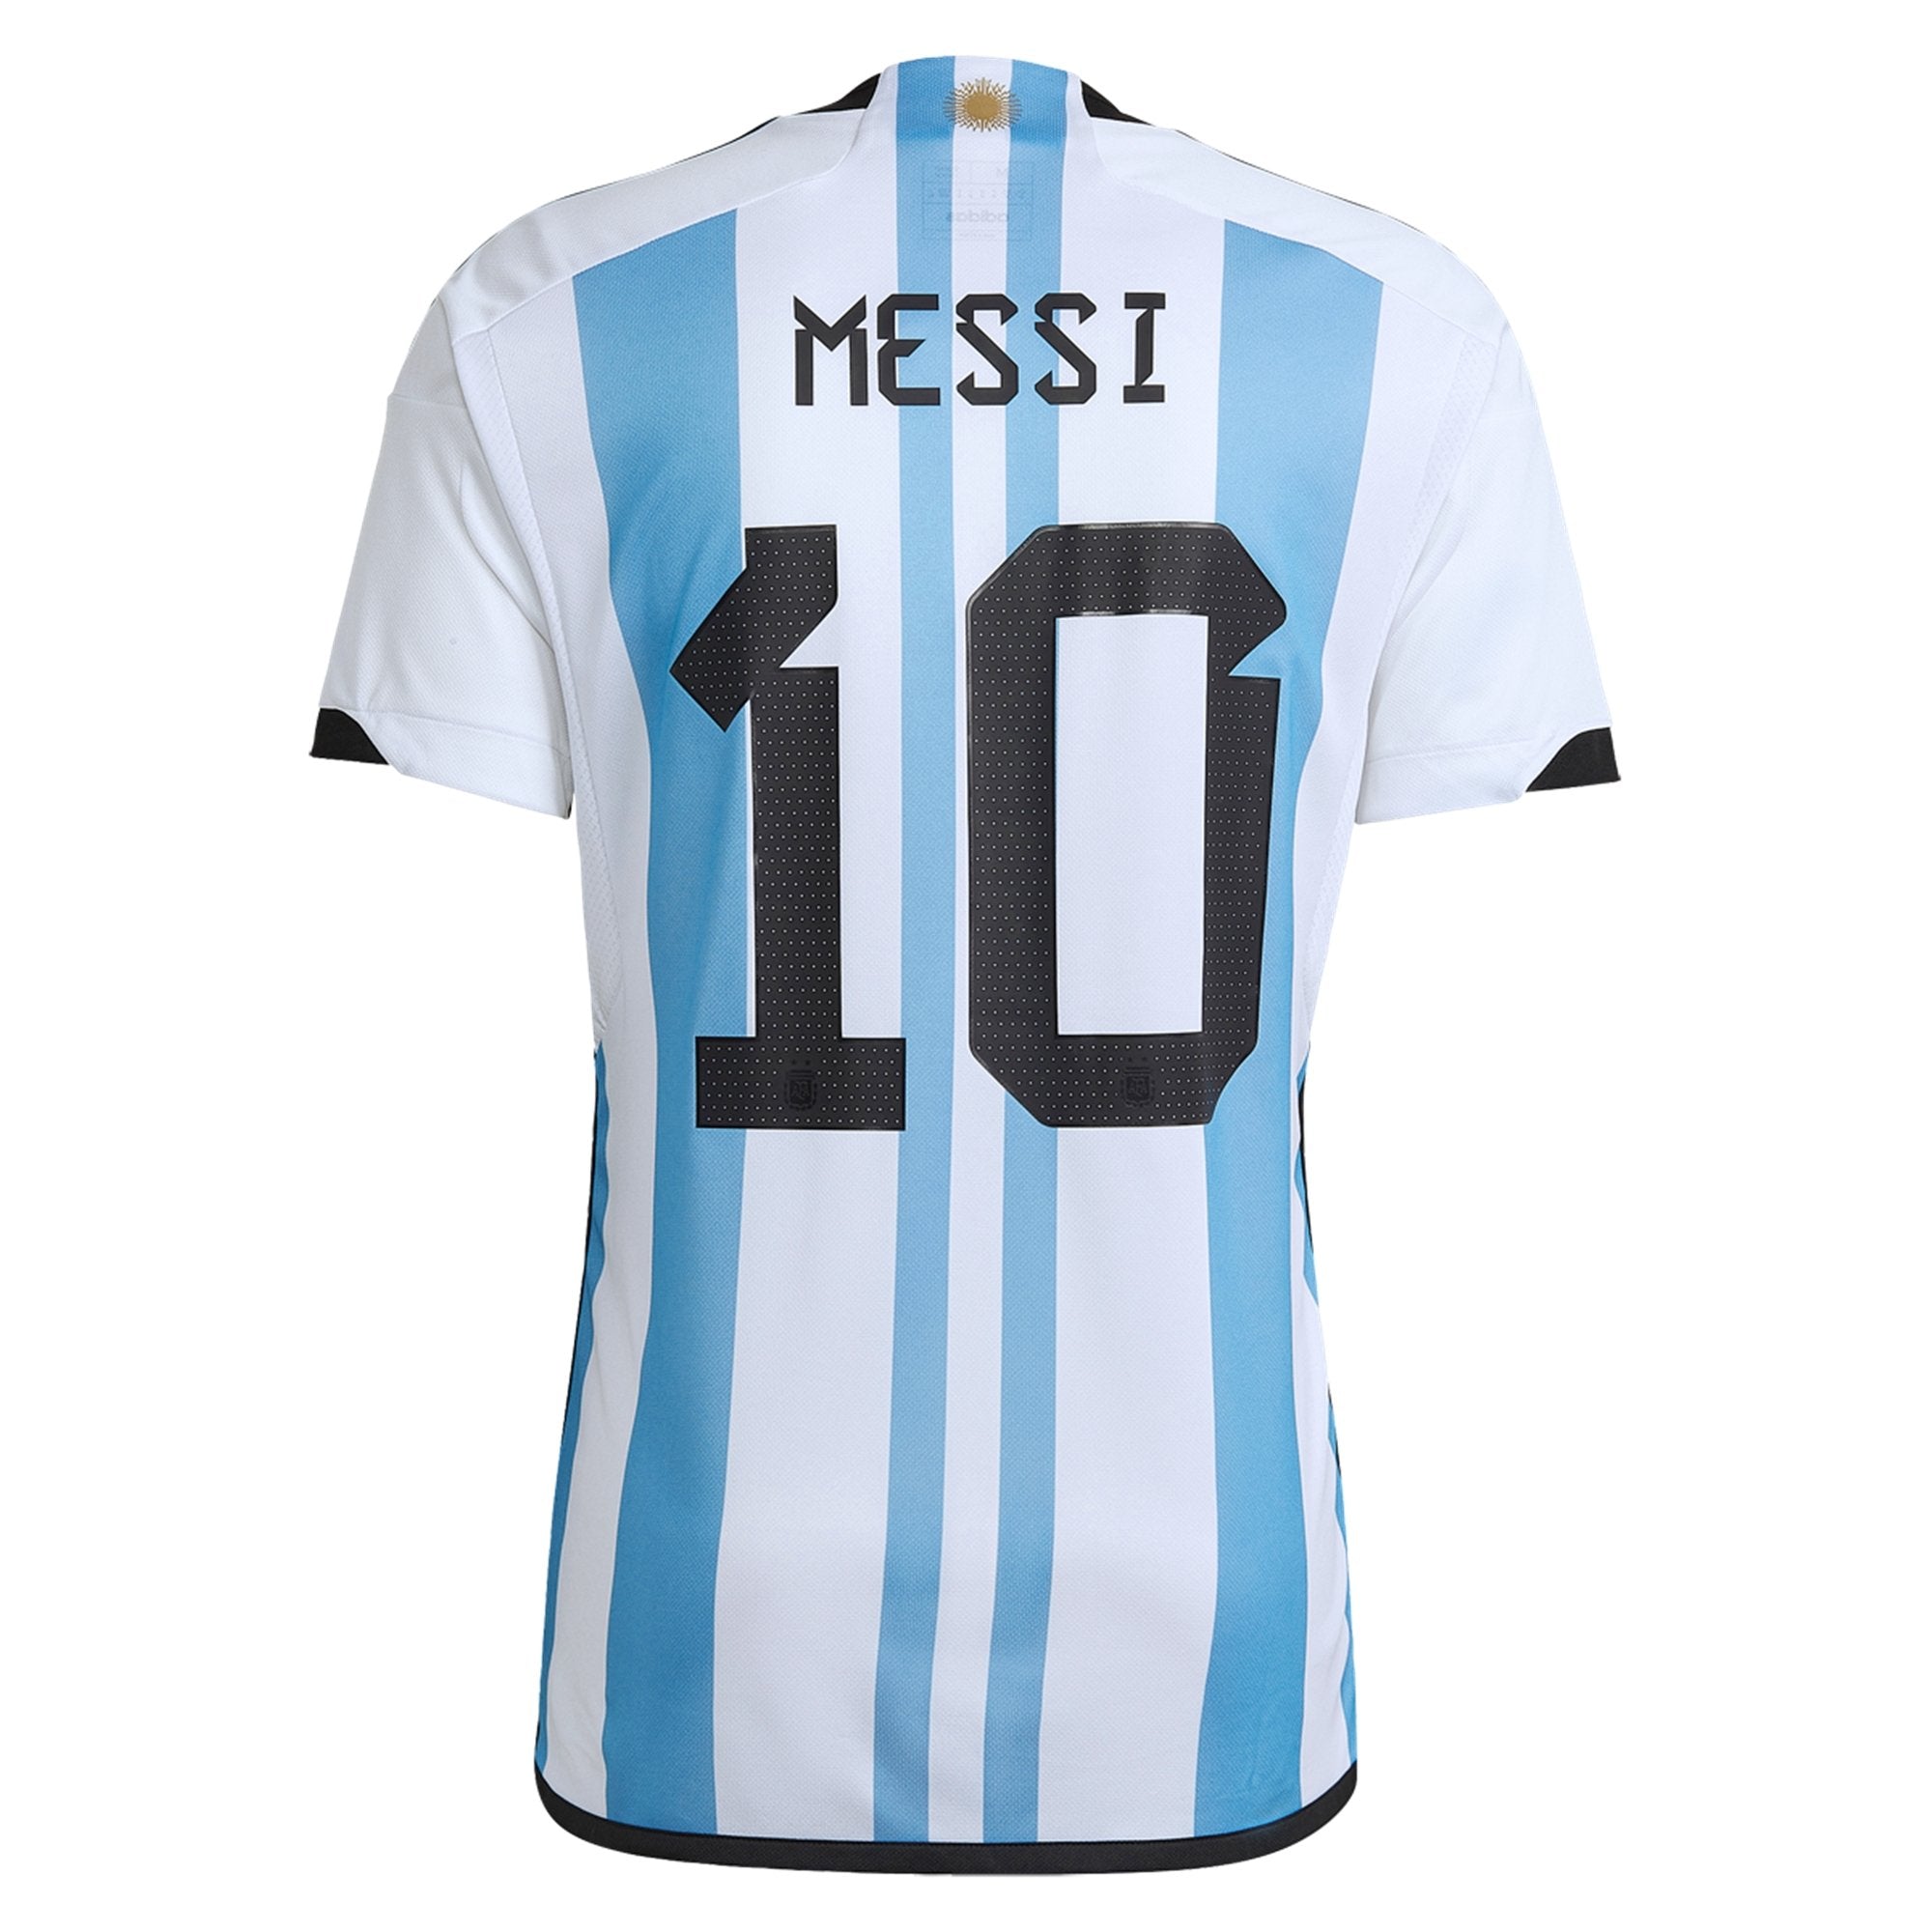 Adidas Argentina 22 Messi Home Jersey S